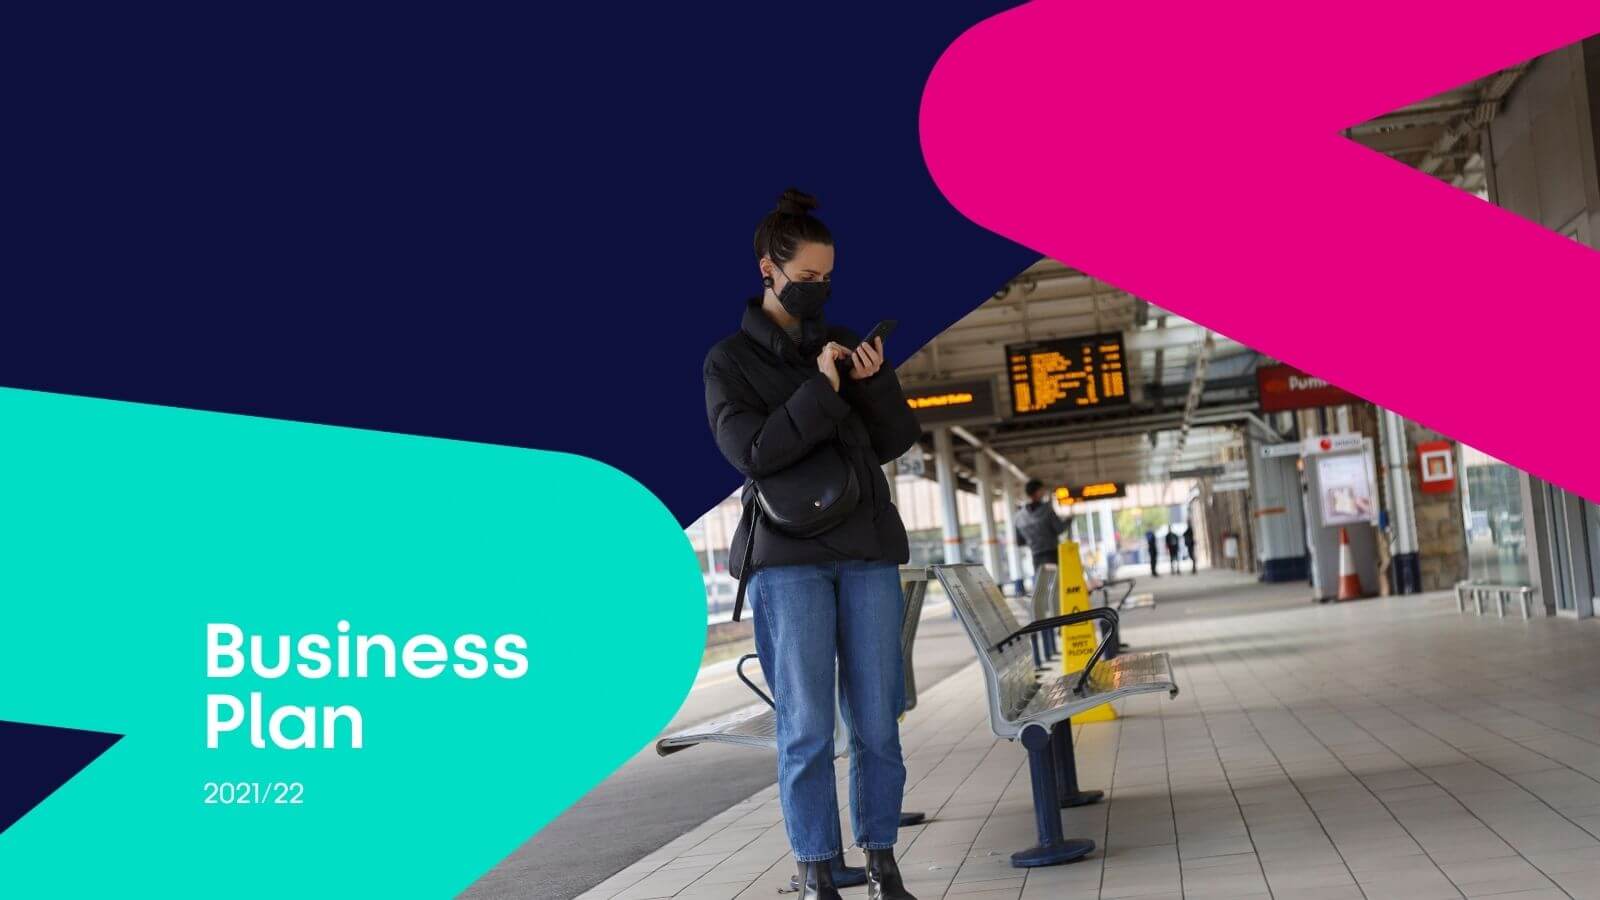 Business Plan 21-22 masked female at train station